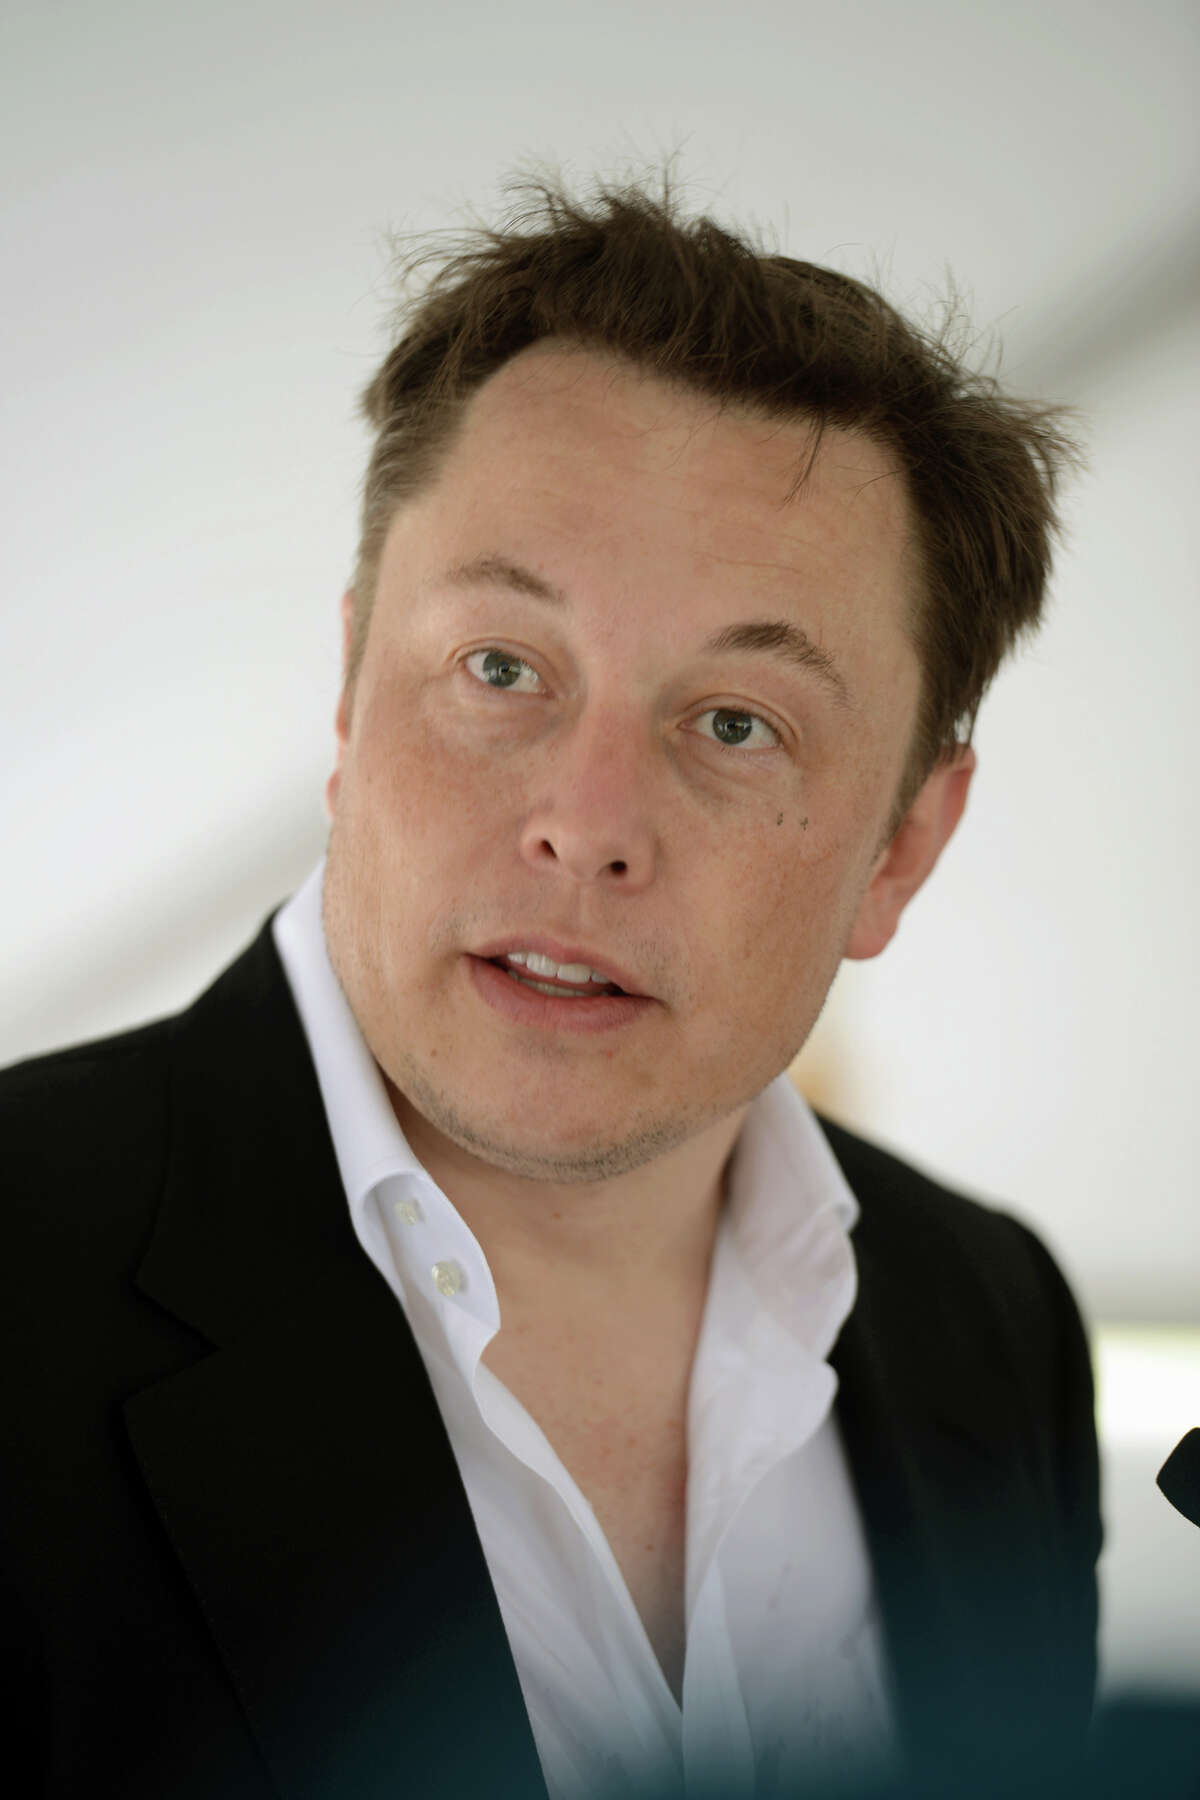 Tesla CEO Elon Musk has called the state law banning direct auto sales “un-Texan.”